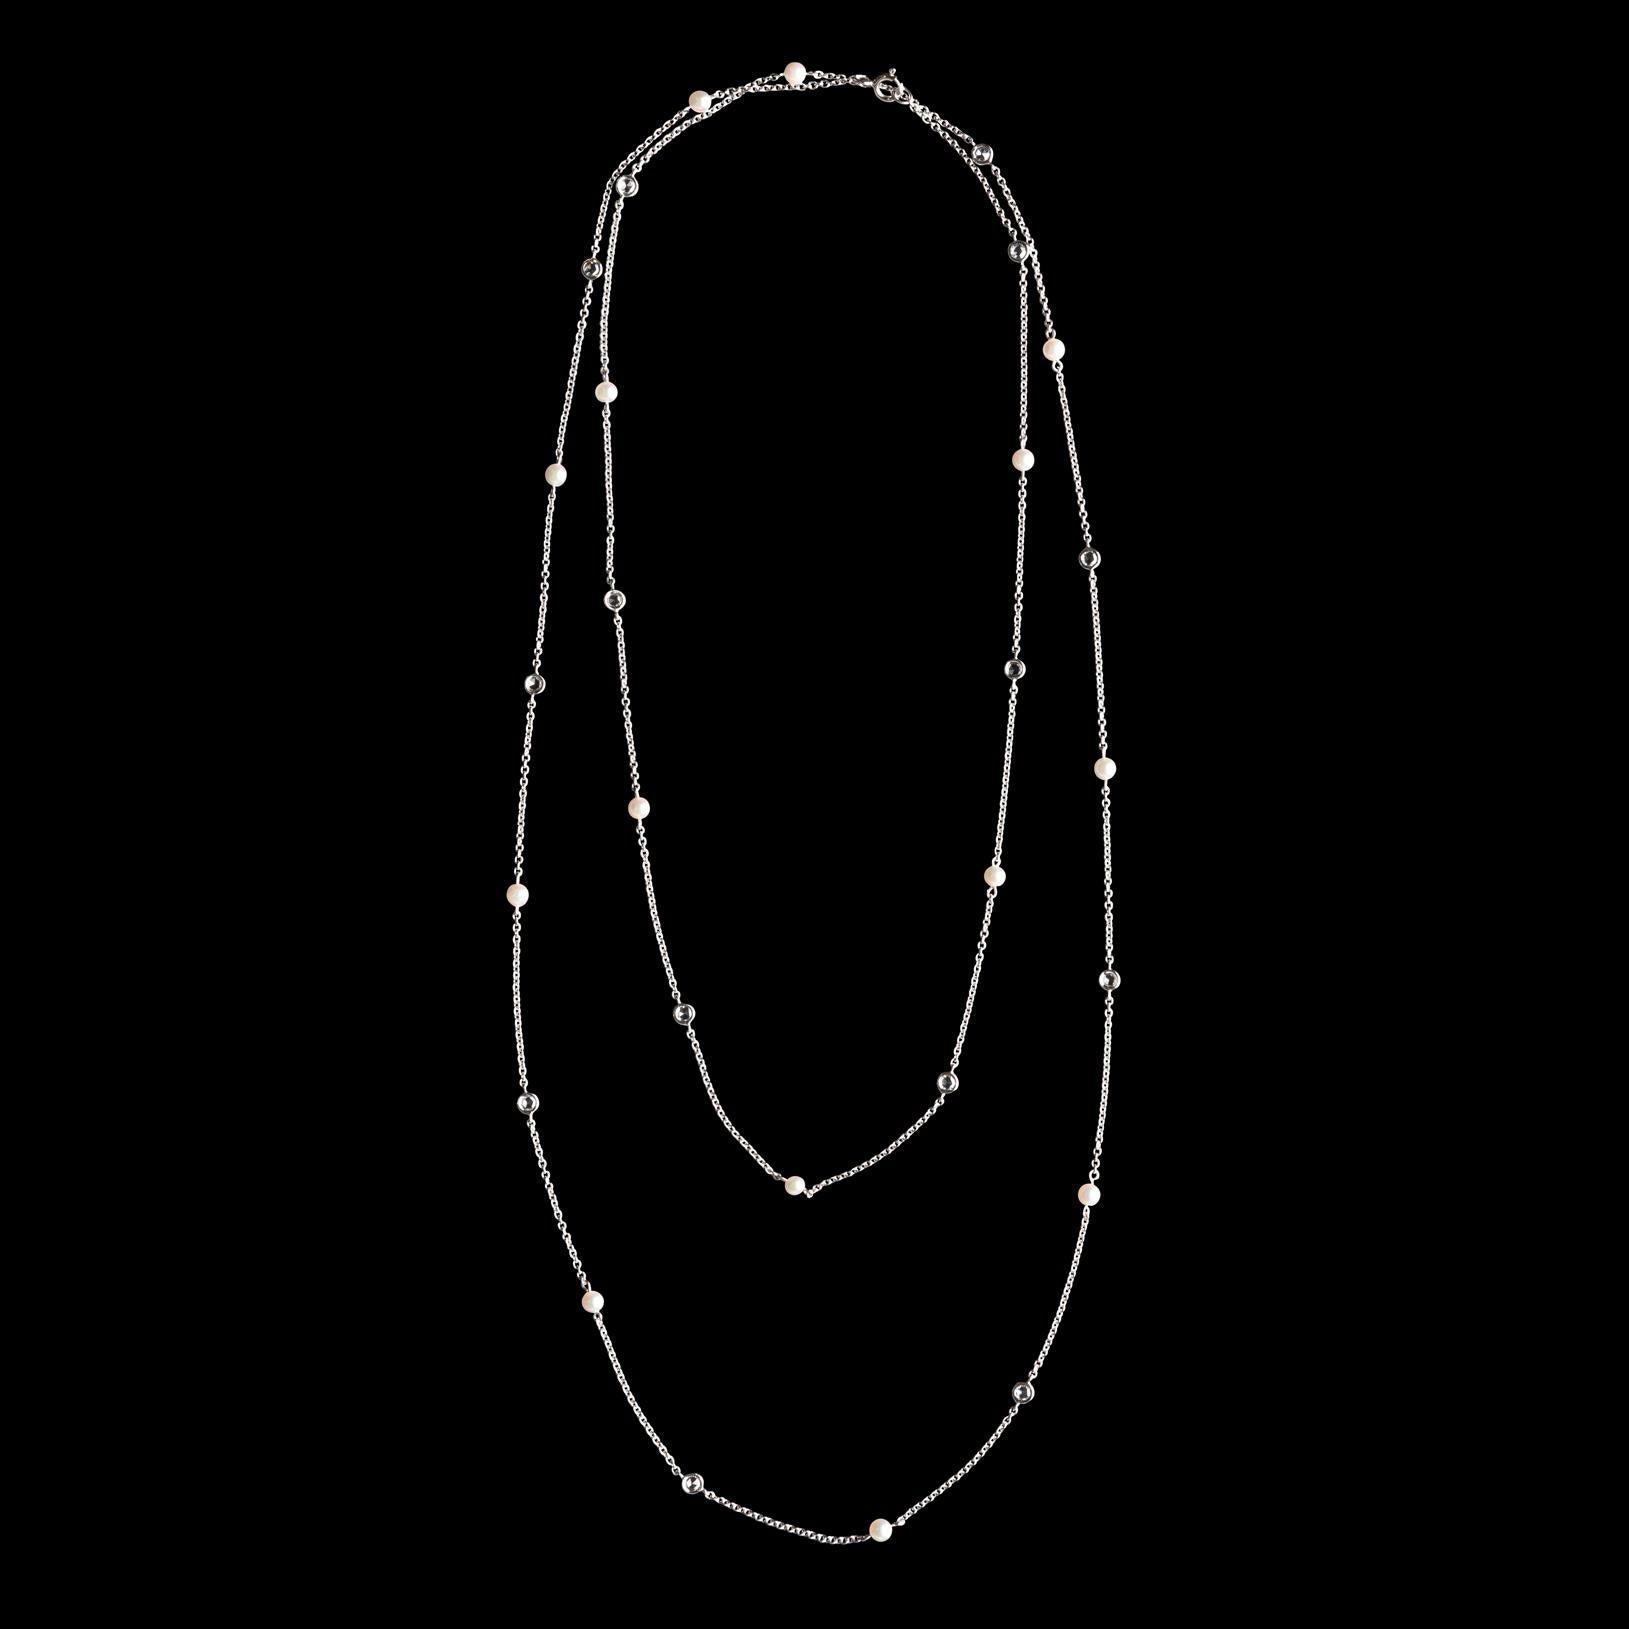 The 18k white gold station long chain necklace is delicate and elegant. Alternating with 14 bezel-set rose-cut diamonds and 3.5mm cultured pearls, the necklace can be worn full length or doubled up. Total diamond weight is 0.42 carat, the necklace